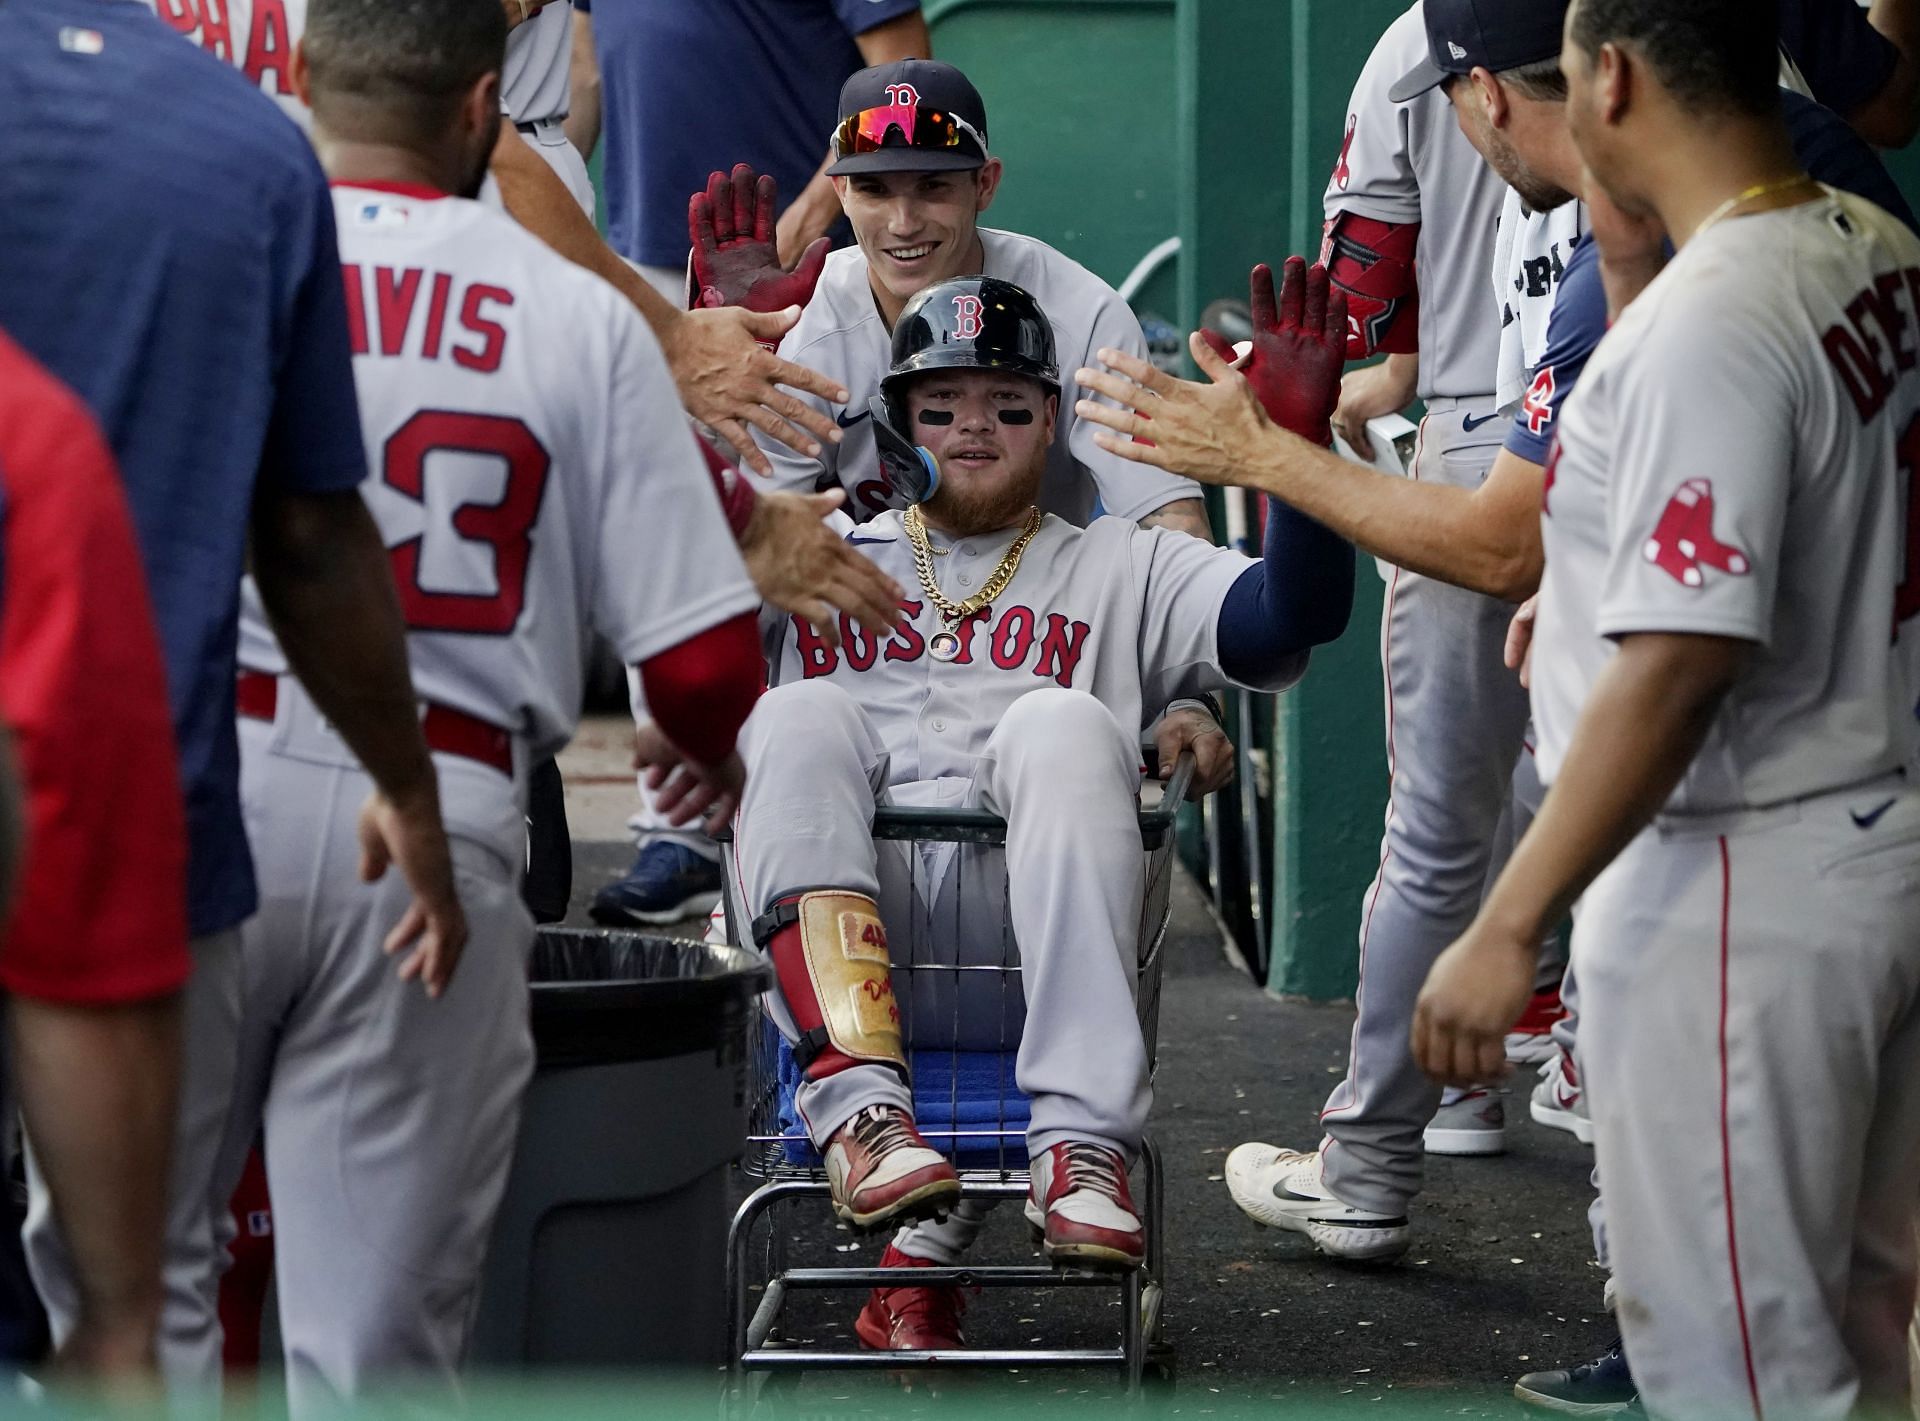 Alex Verdugo of the Boston Red Sox is pushed in a cart through the dug out by Jarren Duran against the Kansas City Royals